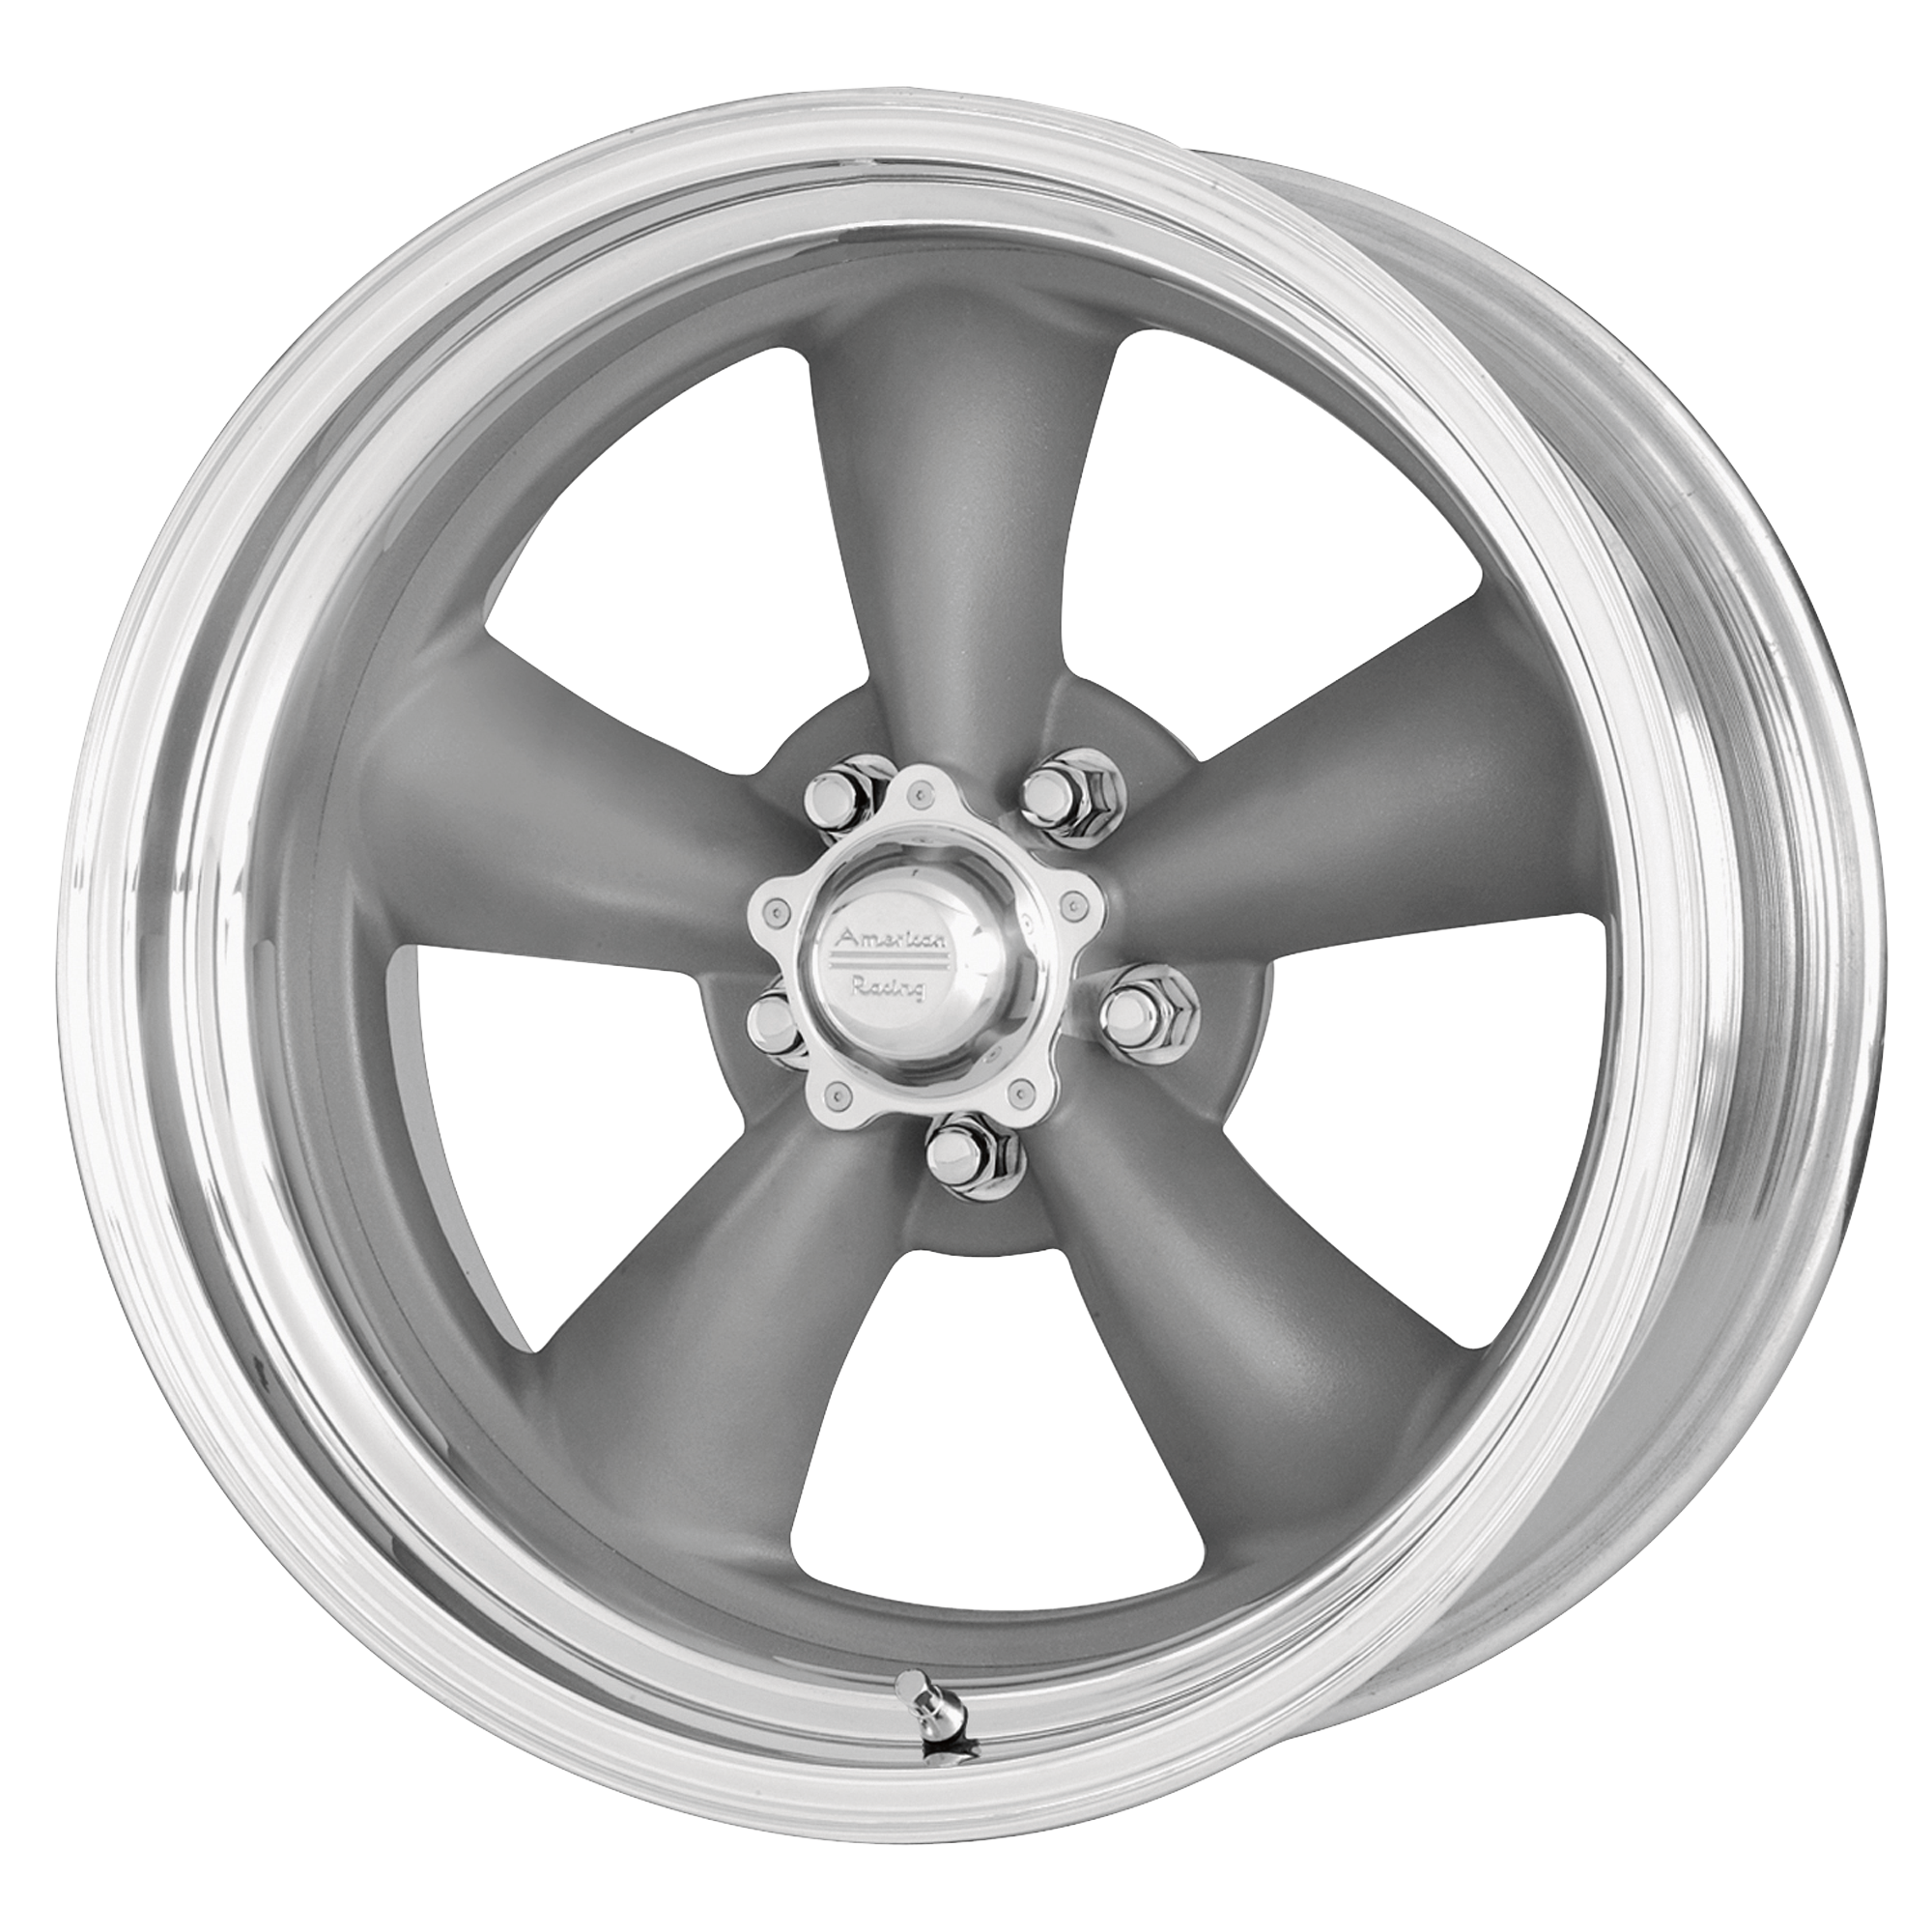 CLASSIC TORQ THRUST II ONE PIECE 17x9.5 5x120.65 MAG GRAY W/ MACHINED LIP (8 mm) - Tires and Engine Performance